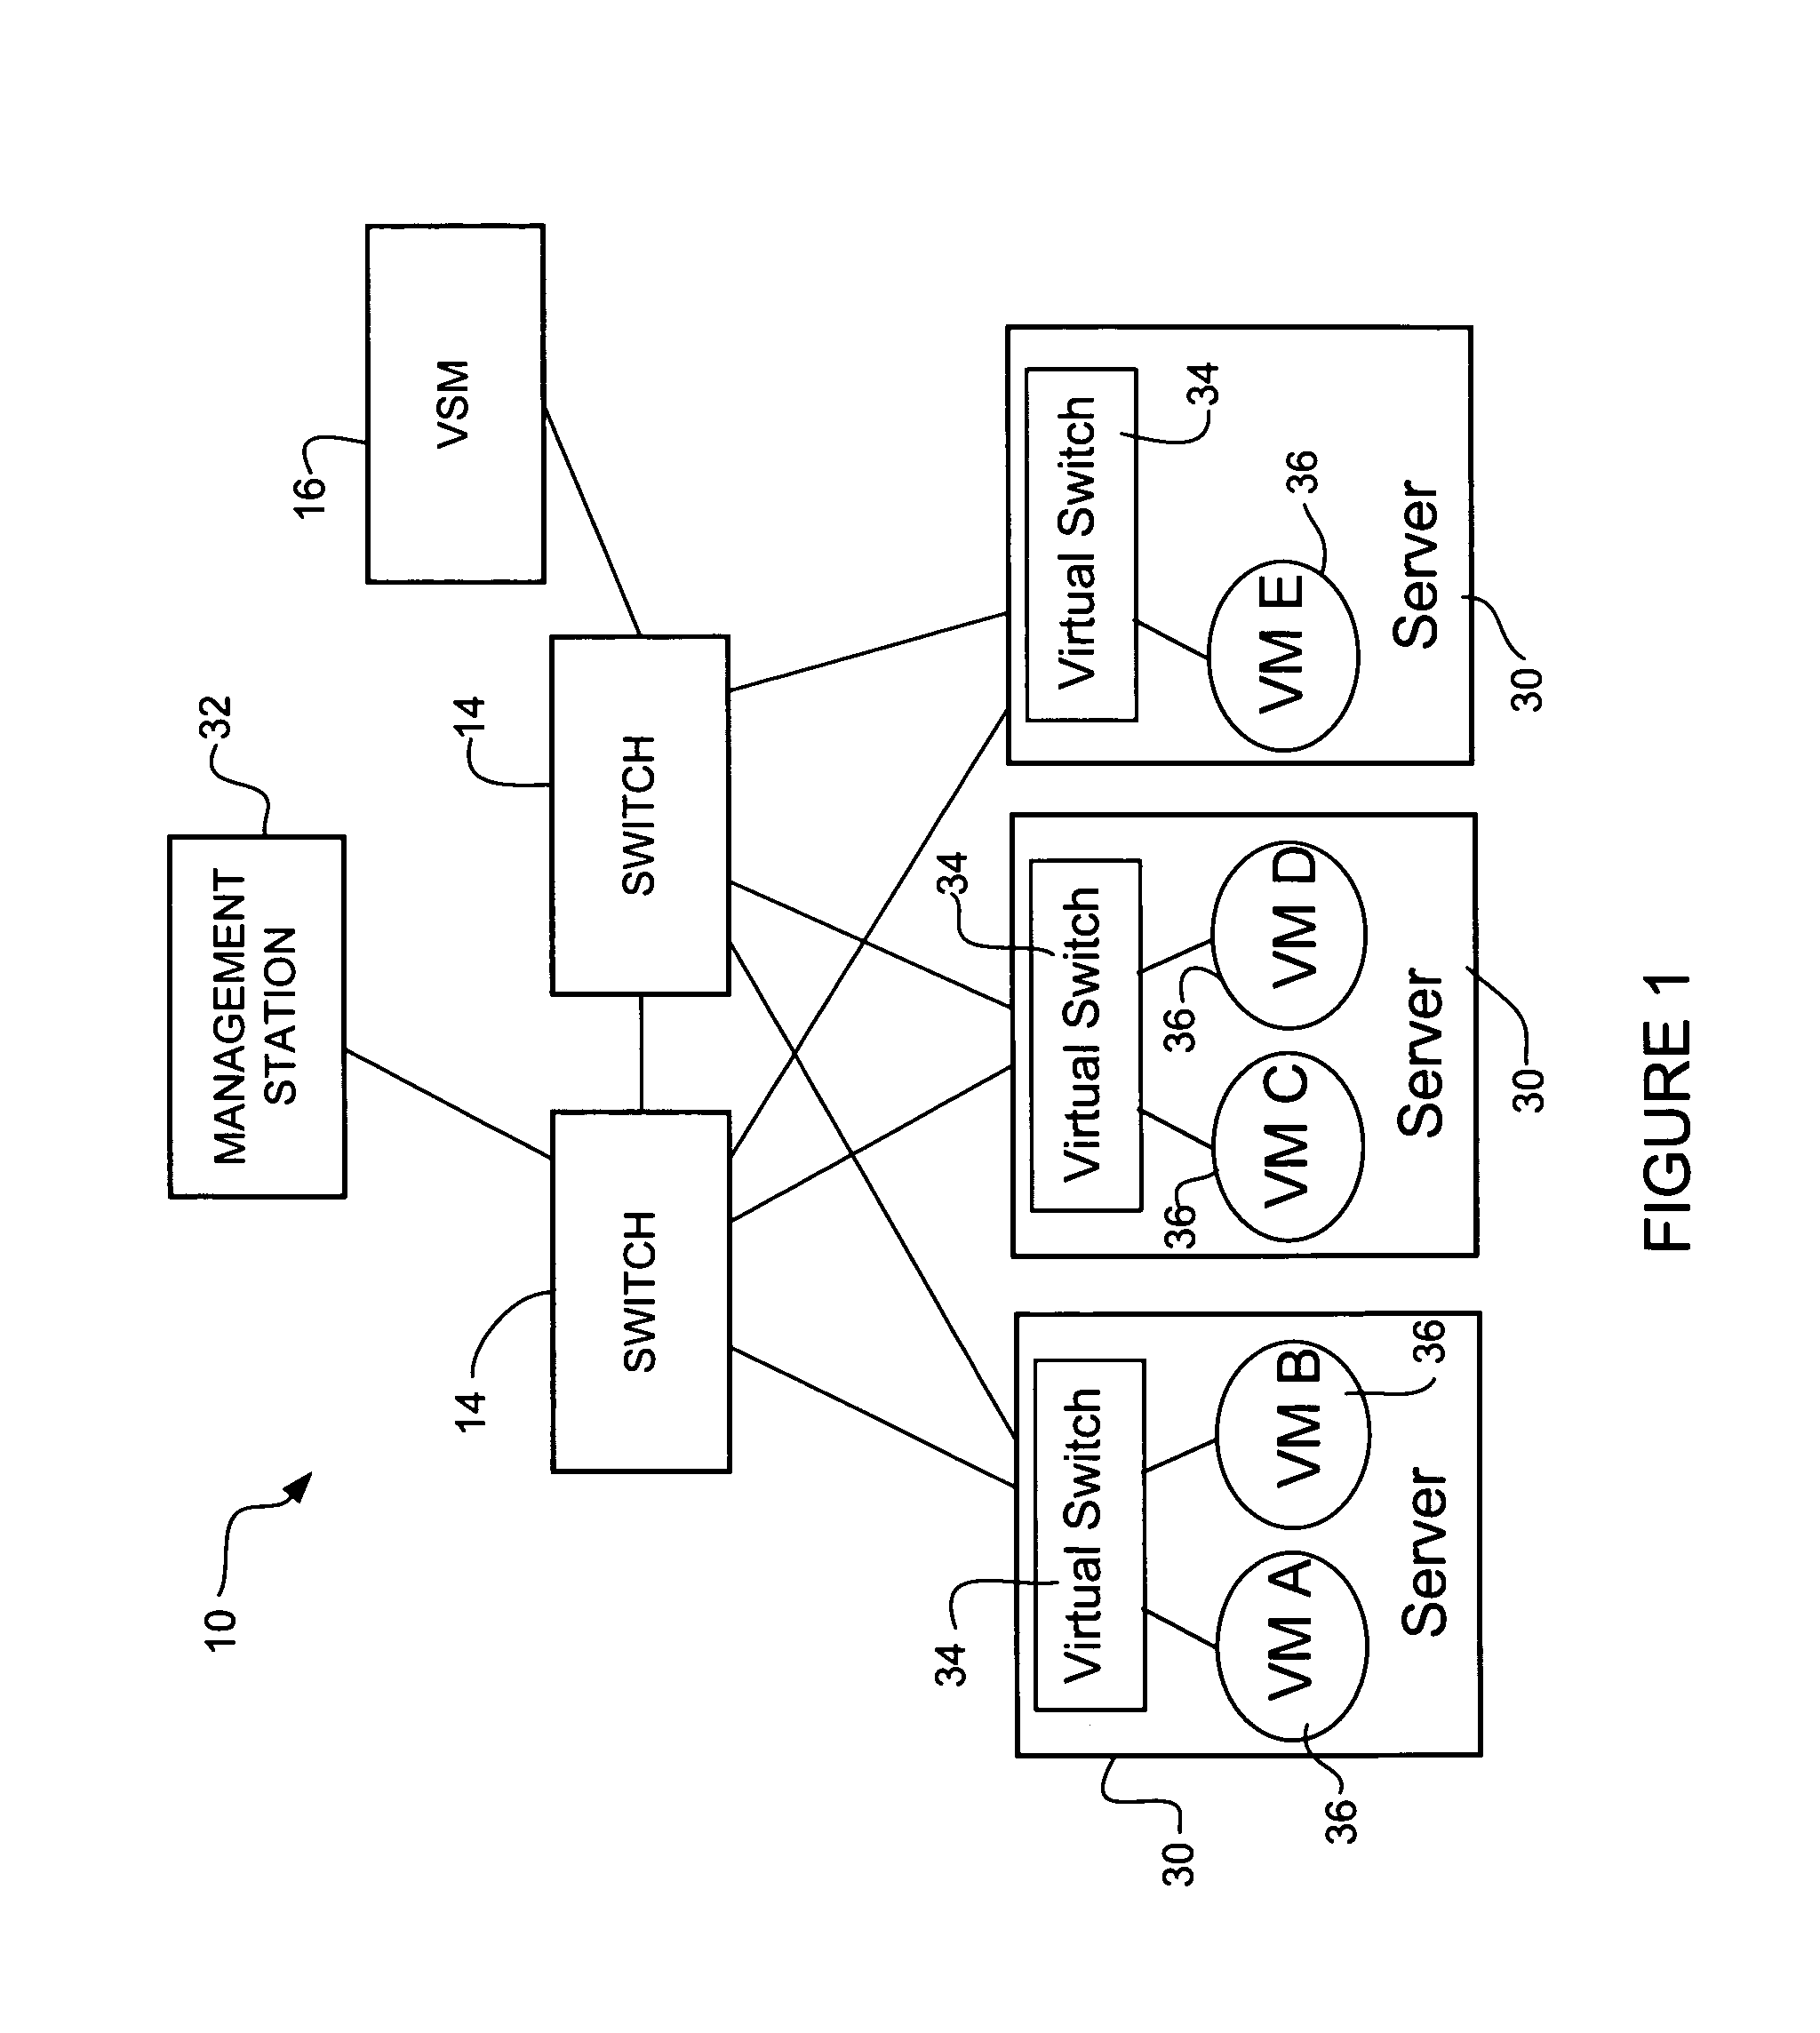 Policy based configuration of interfaces in a virtual machine environment